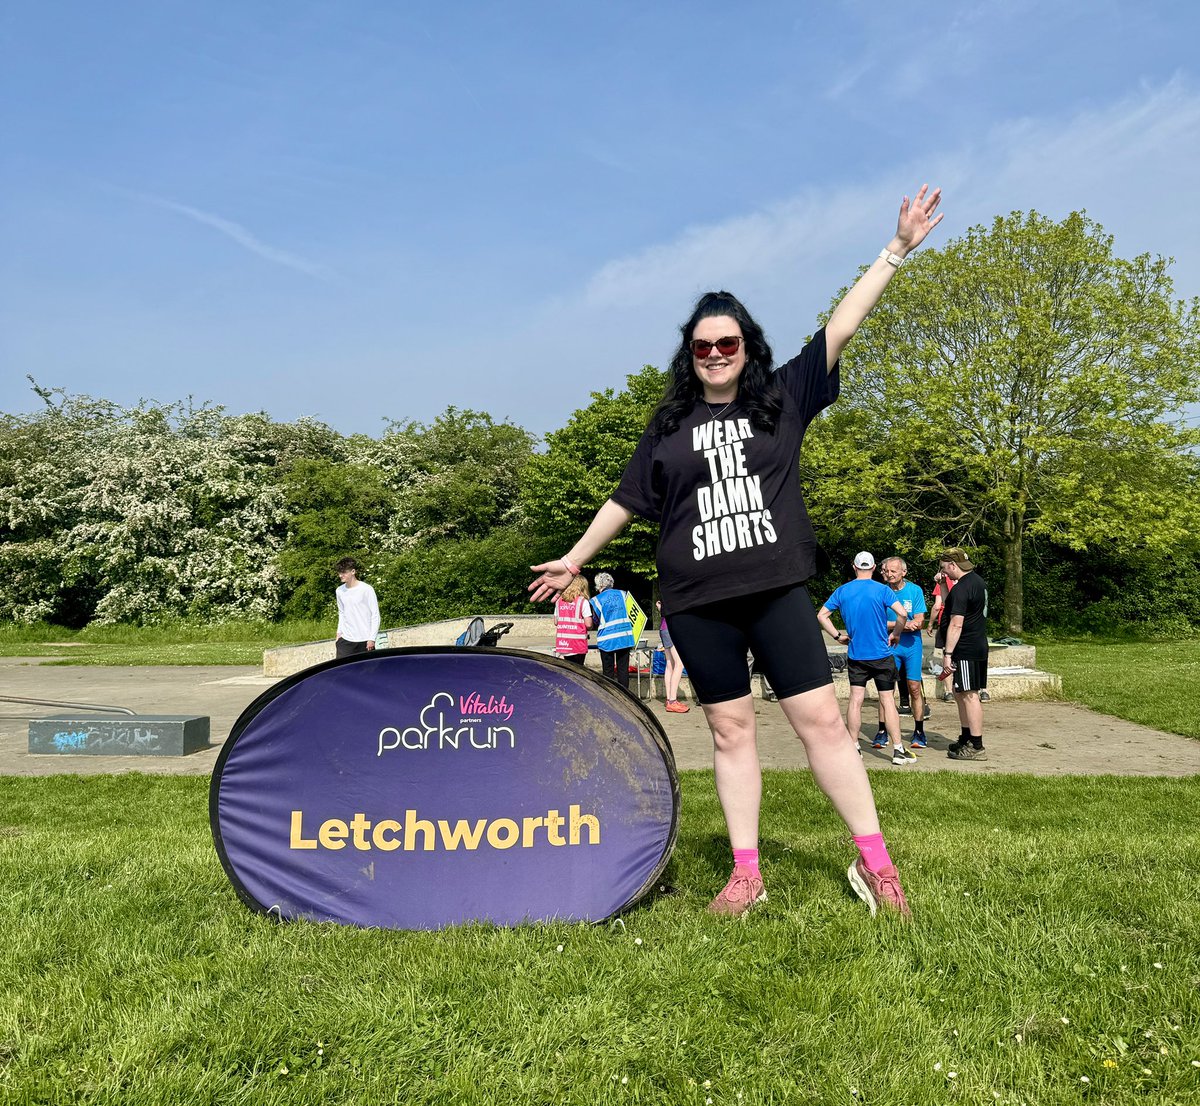 Spreading the message at @letchworthprkrn this morning 🩳❤️ #loveparkrun #wearthedamnshorts